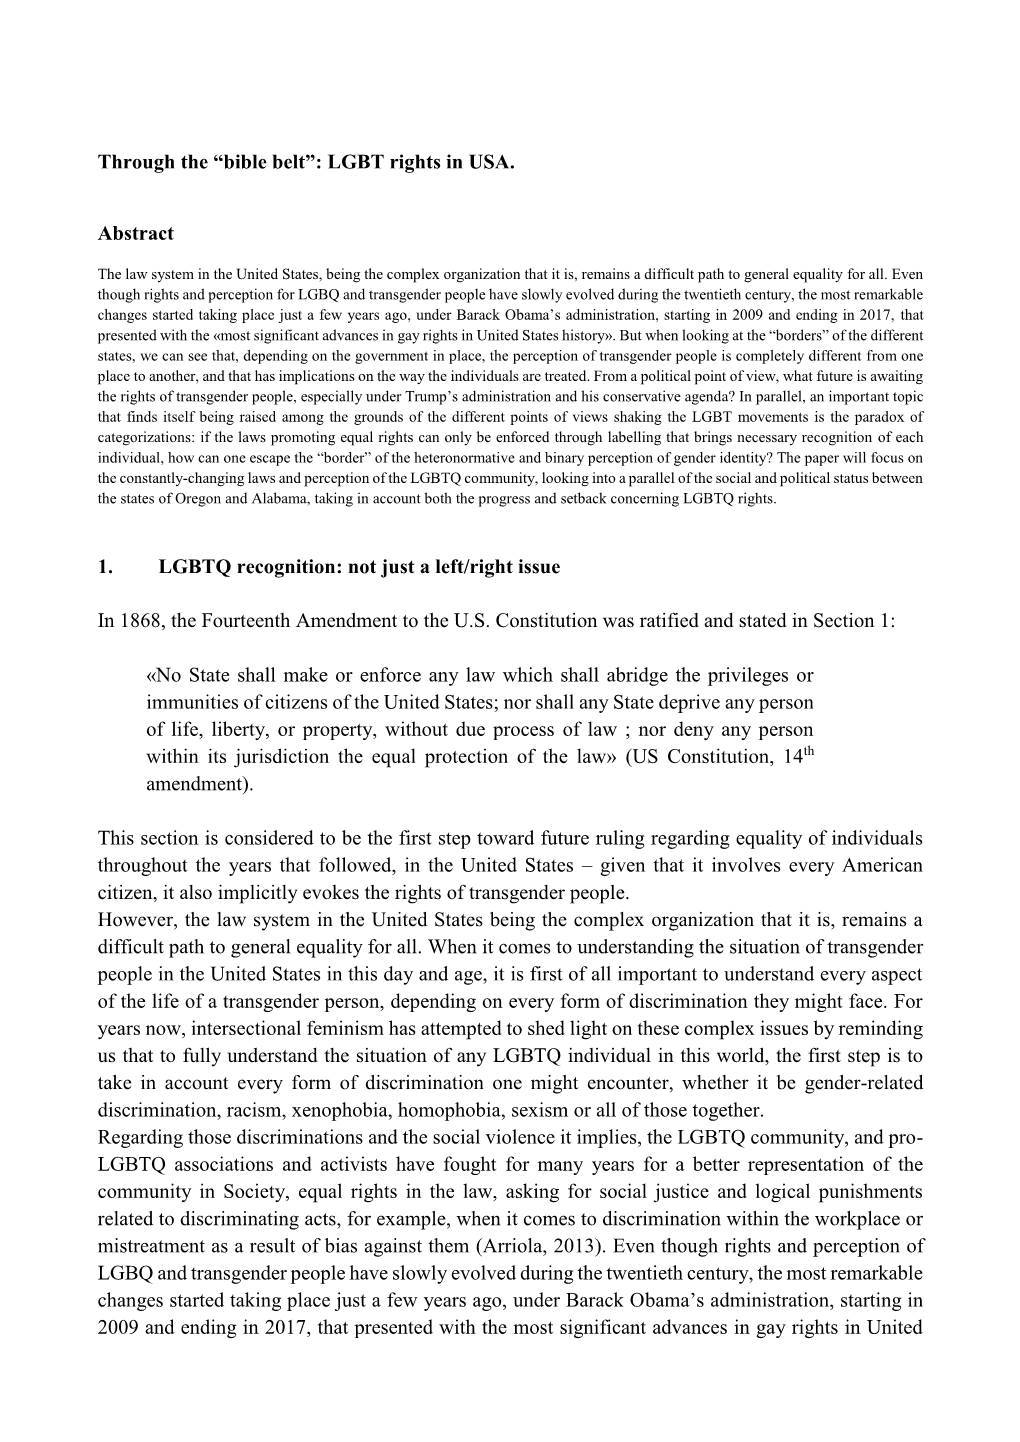 LGBT Rights in USA. Abstract 1. LGBTQ Recognition